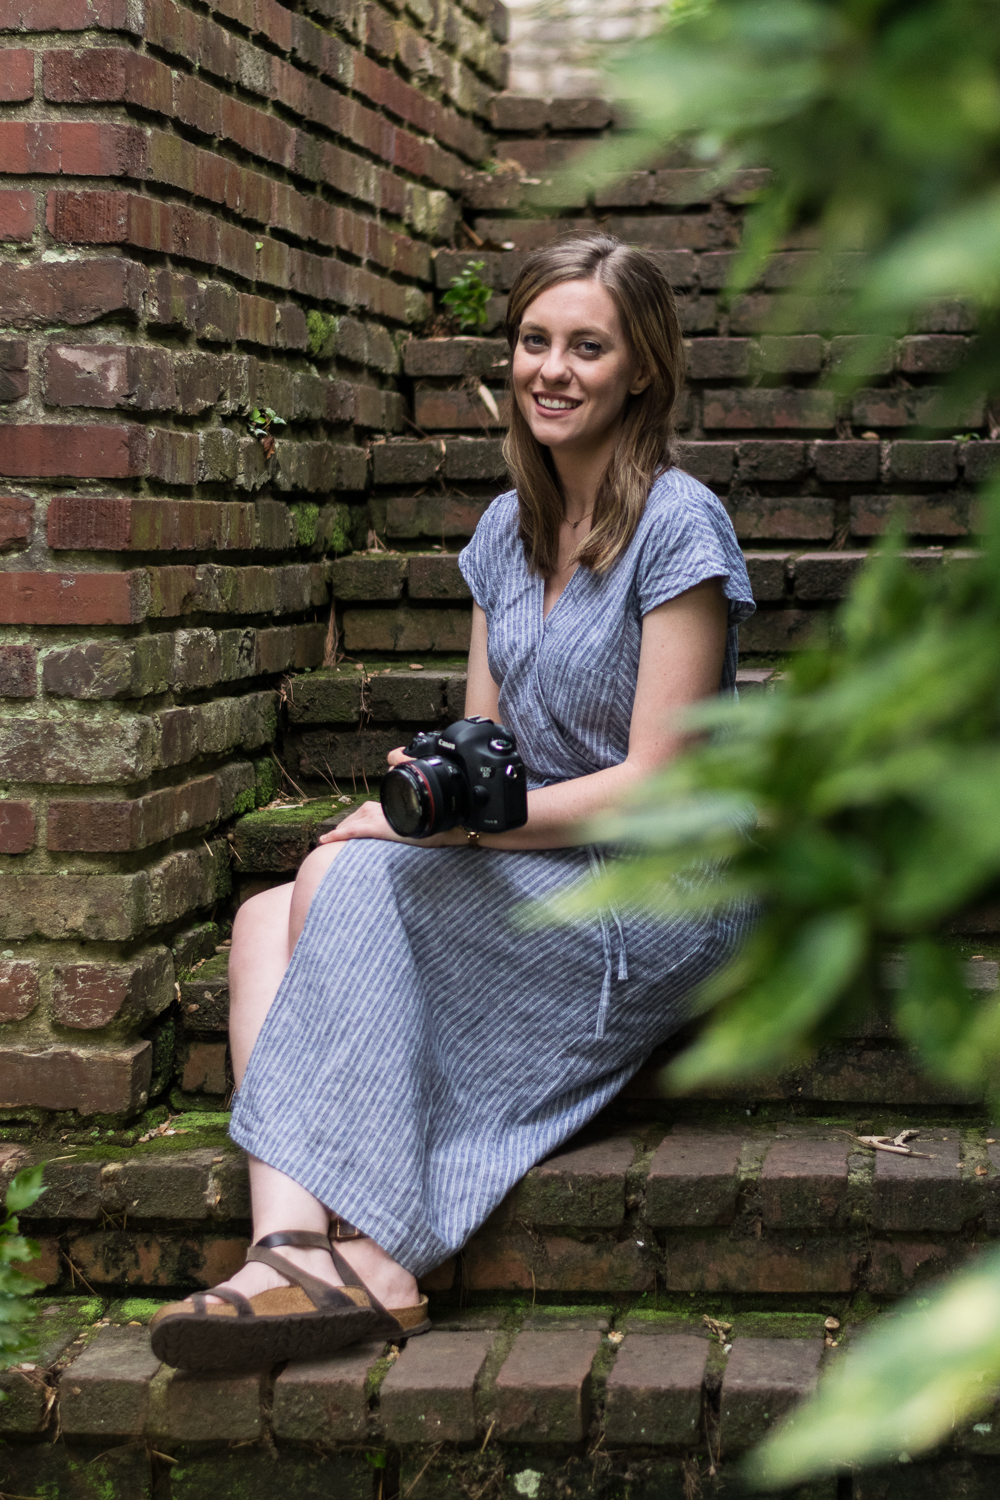 Knoxville photographer Krista Weatherholt sits on brick steps with her camera.